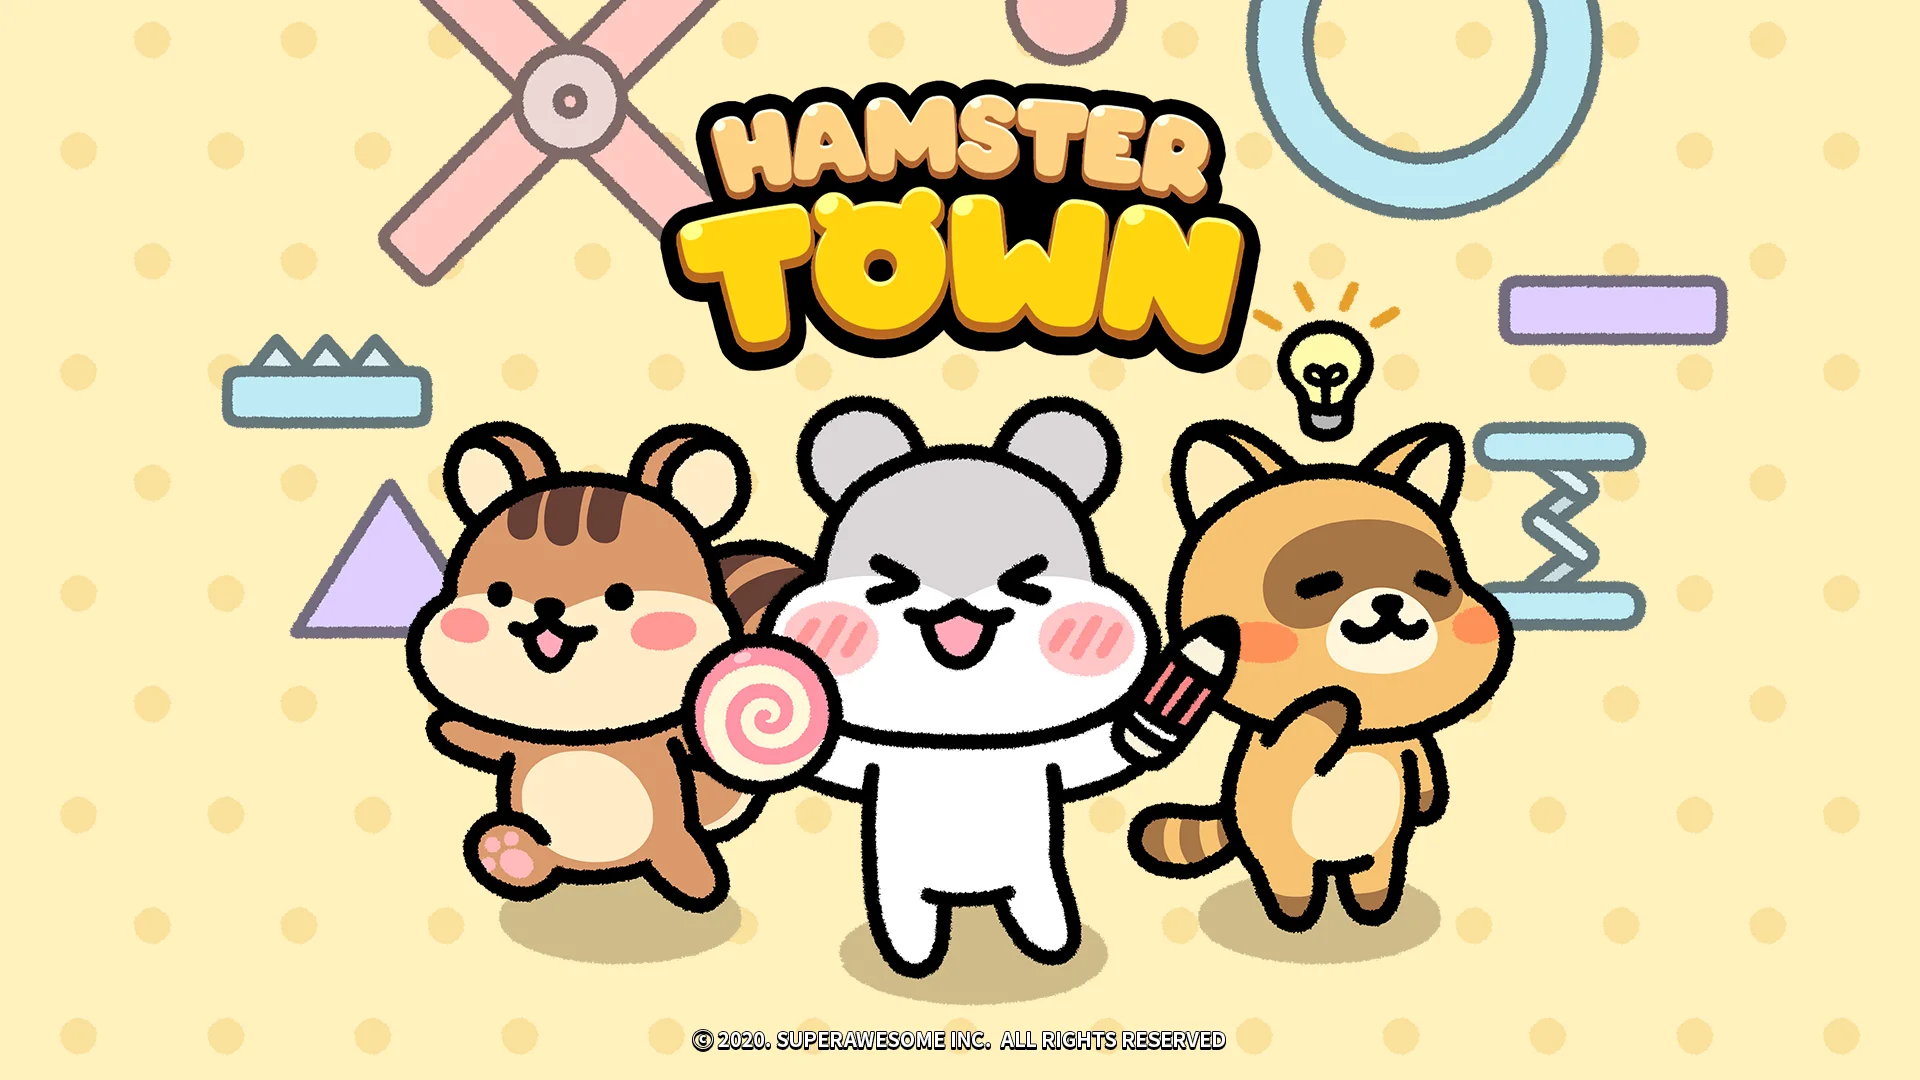 Hamster Town 8